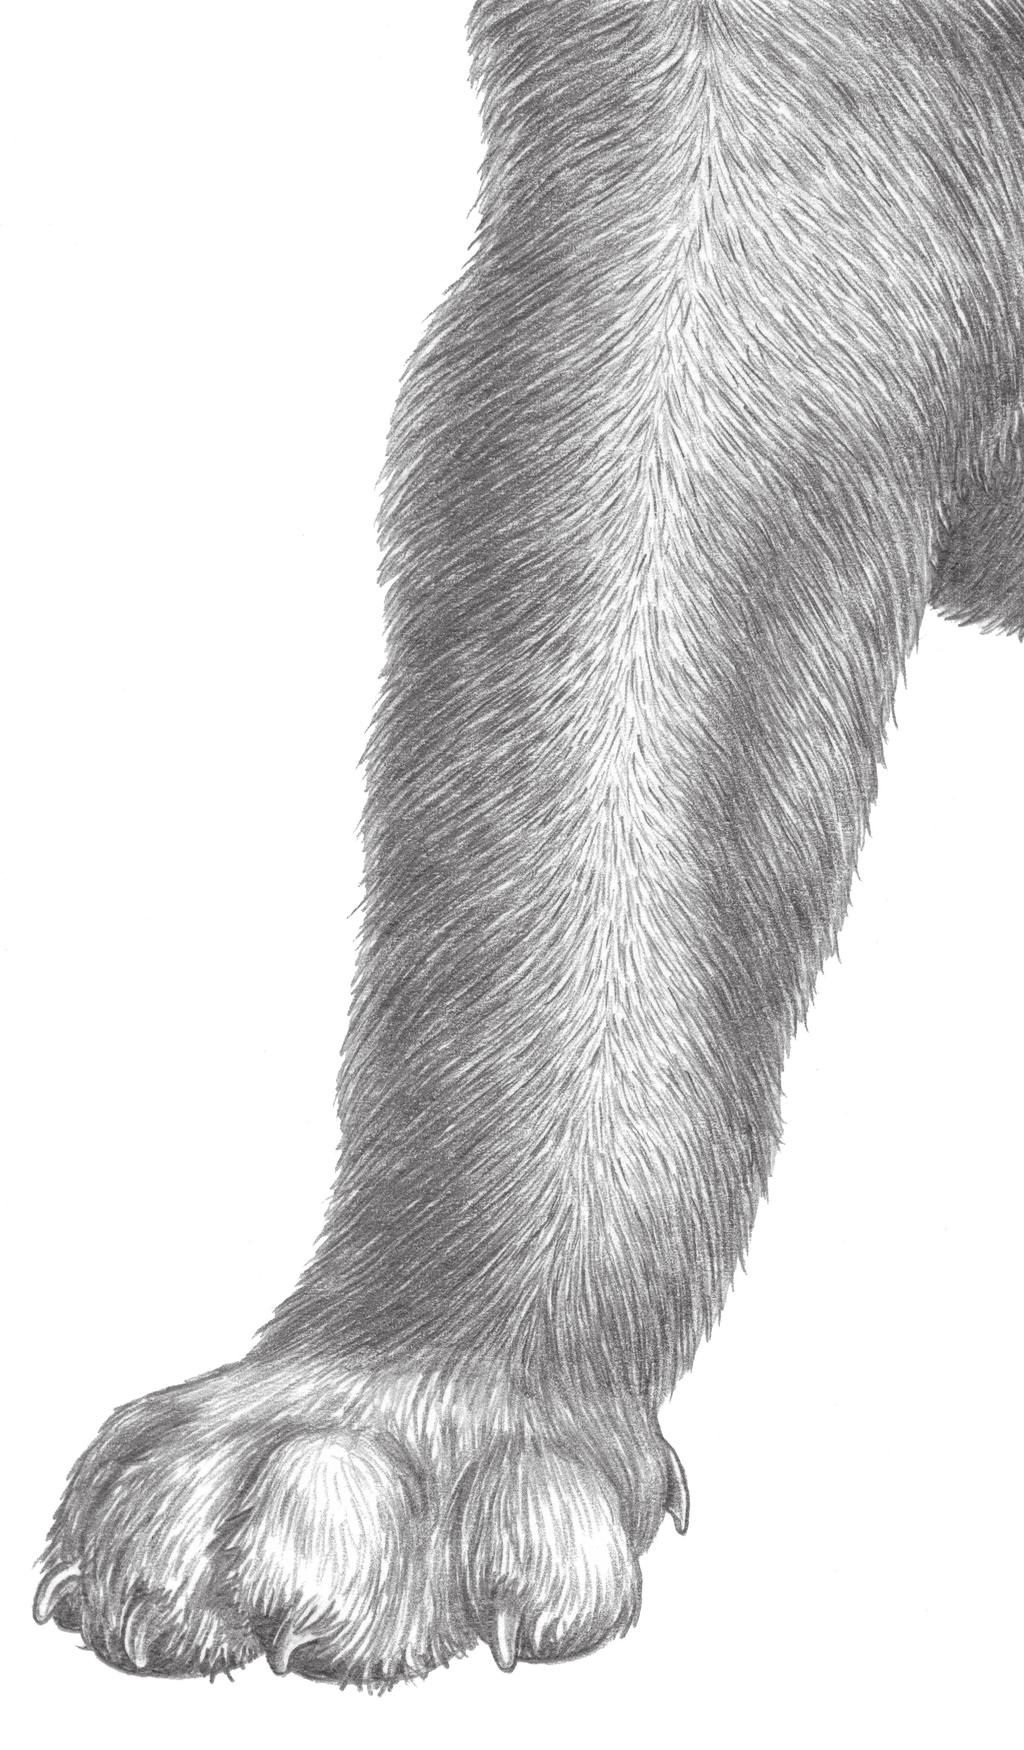 Figure 22 Add Final Details 17. Use a freshlysharpened 4B pencil to add a little section of dark fur to the chest (Figure 22).